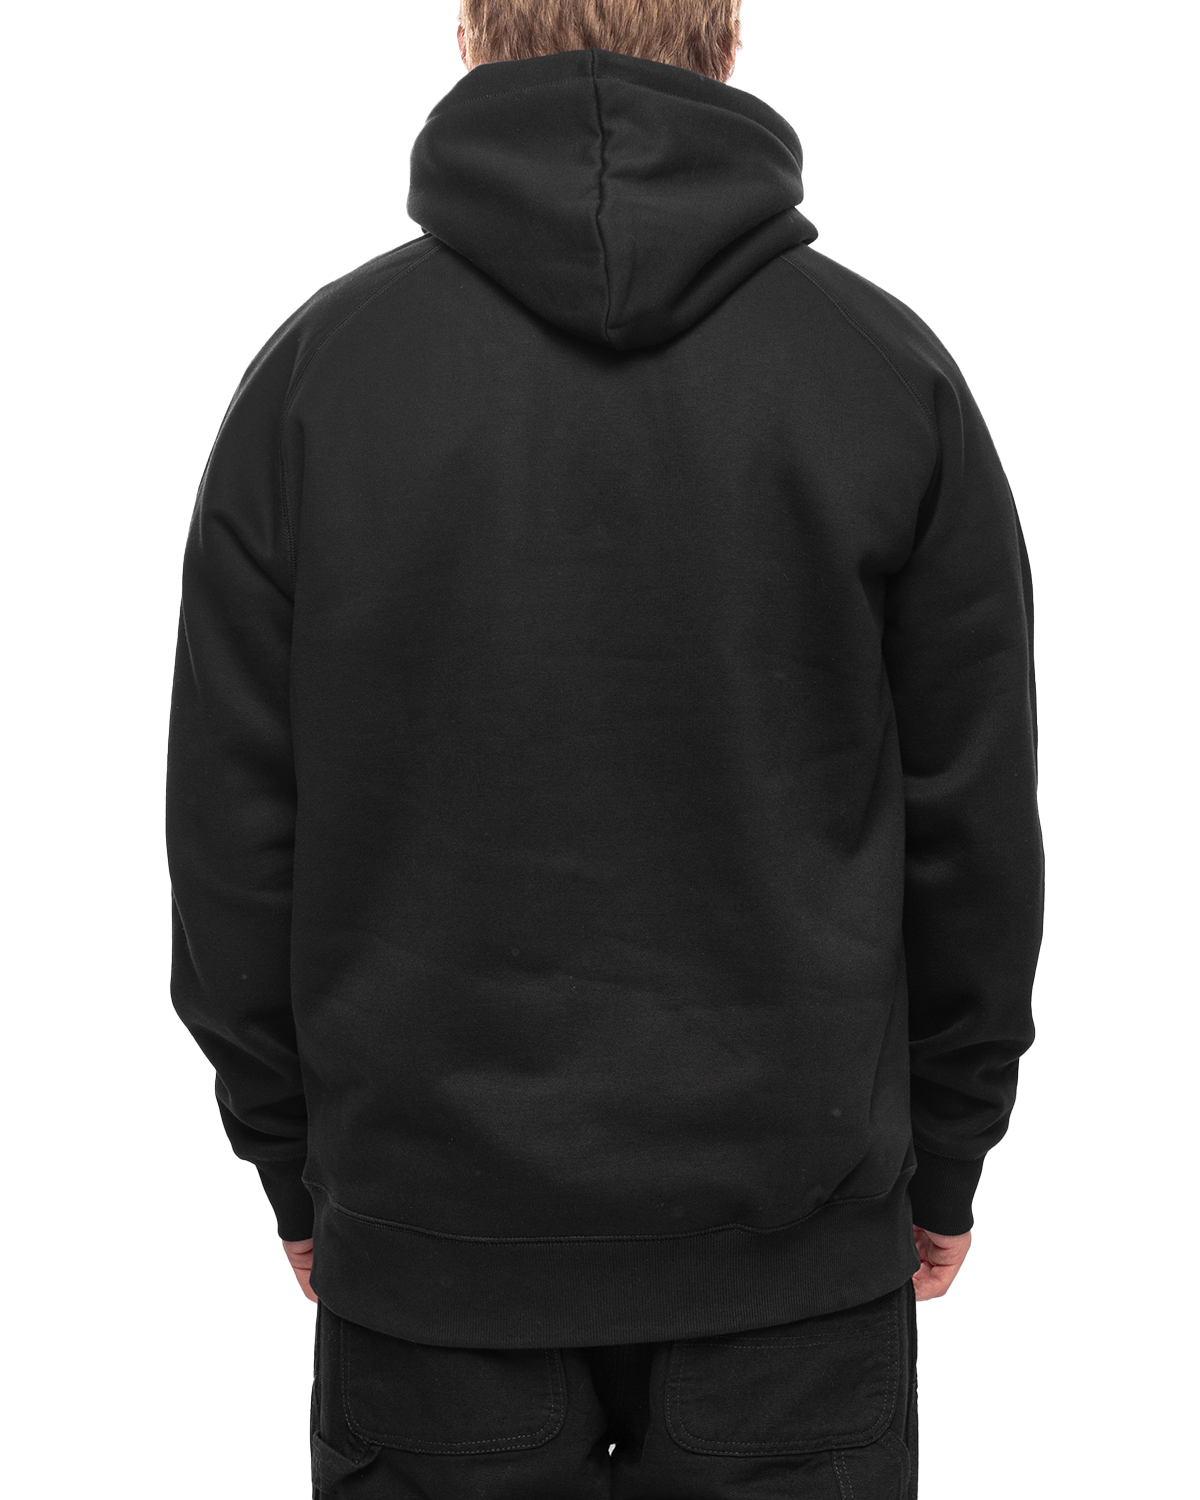 Hooded Chase Sweat Black/Gold